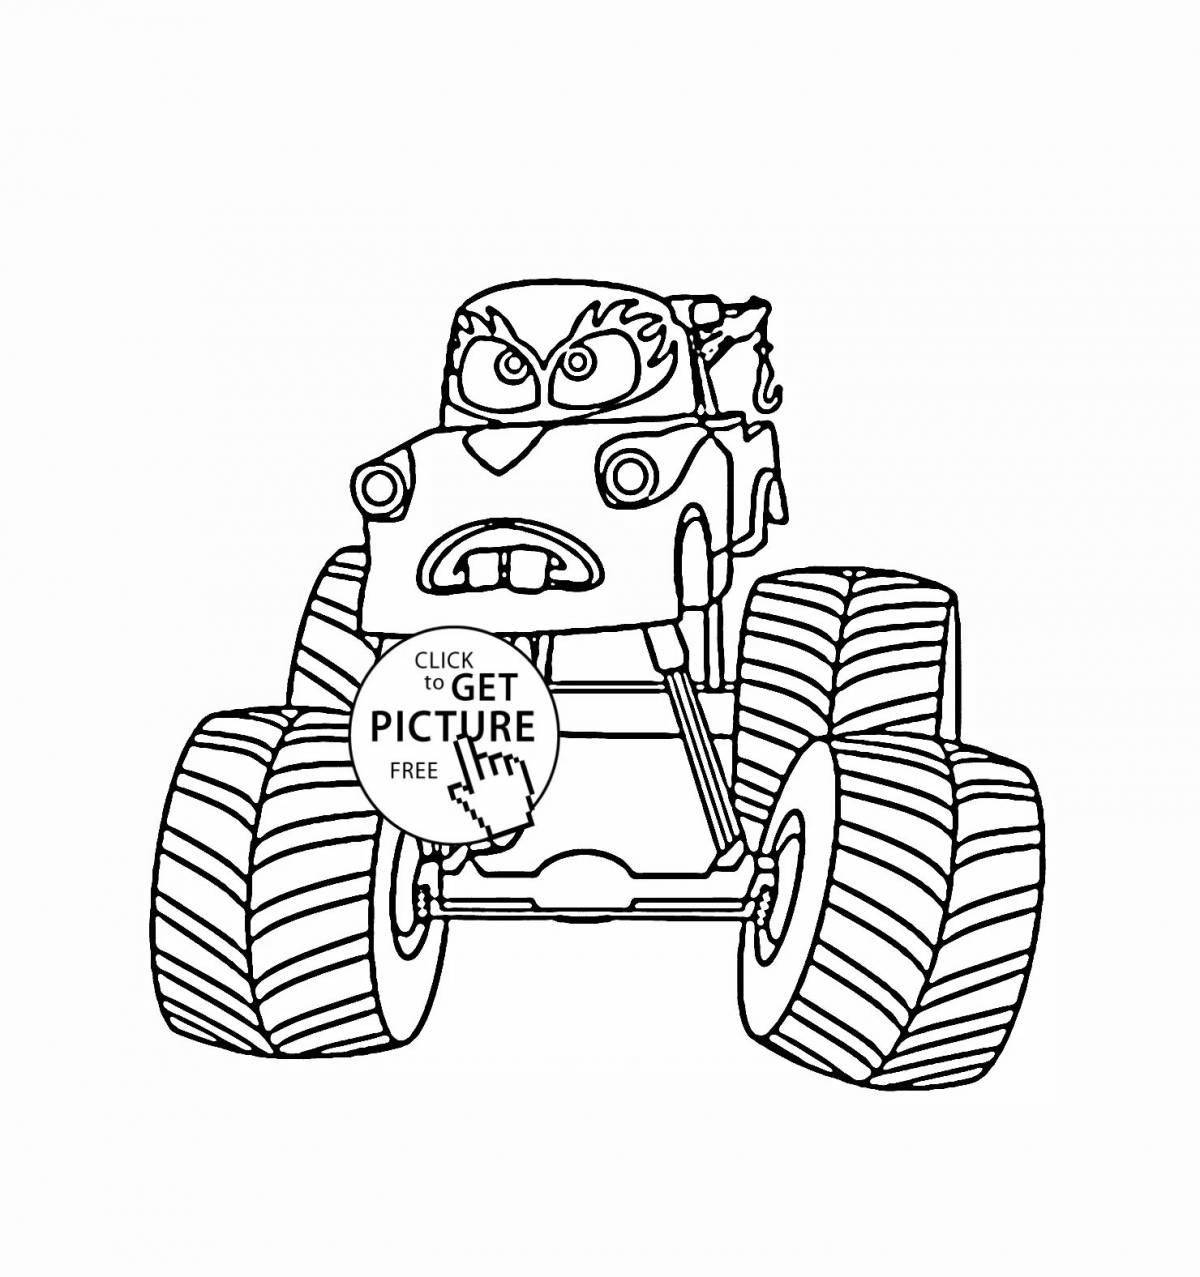 Adorable monster tractor coloring page